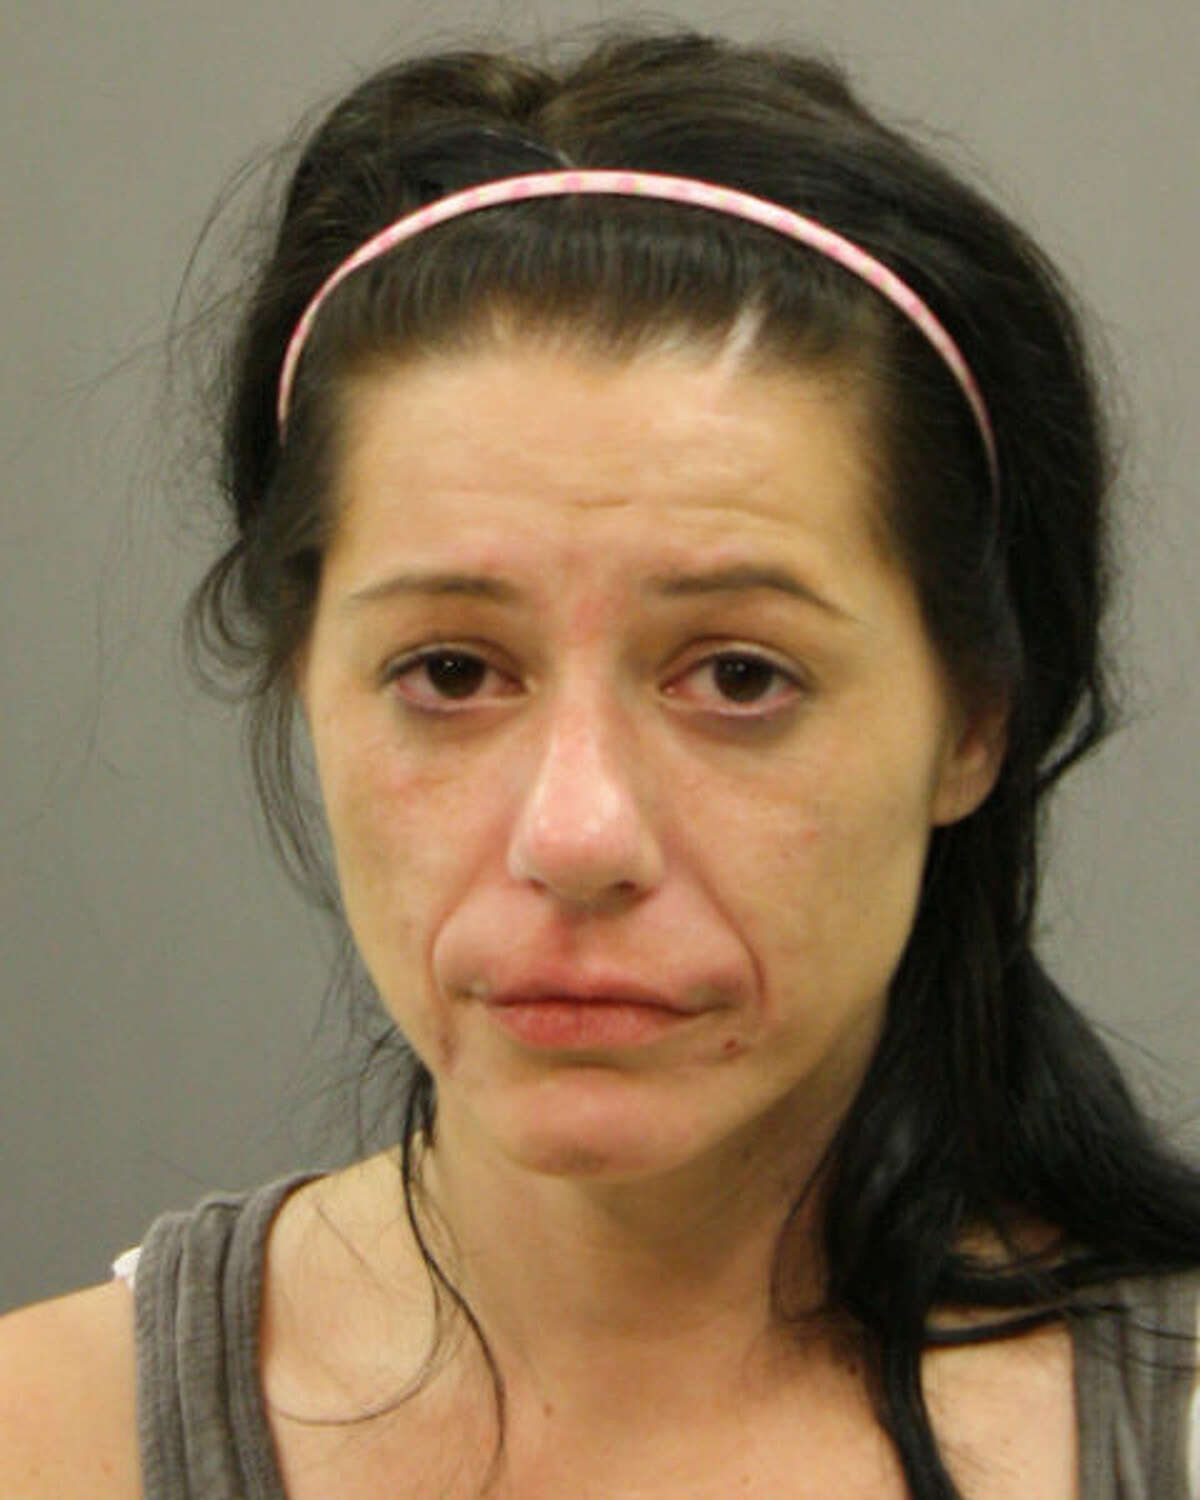 Sarah Shibley, 33, is charged with felony child endangerment in Harris County after she allegedly left her infant child in the middle of a parking space at a Katy strip center on March 21, 2017. 